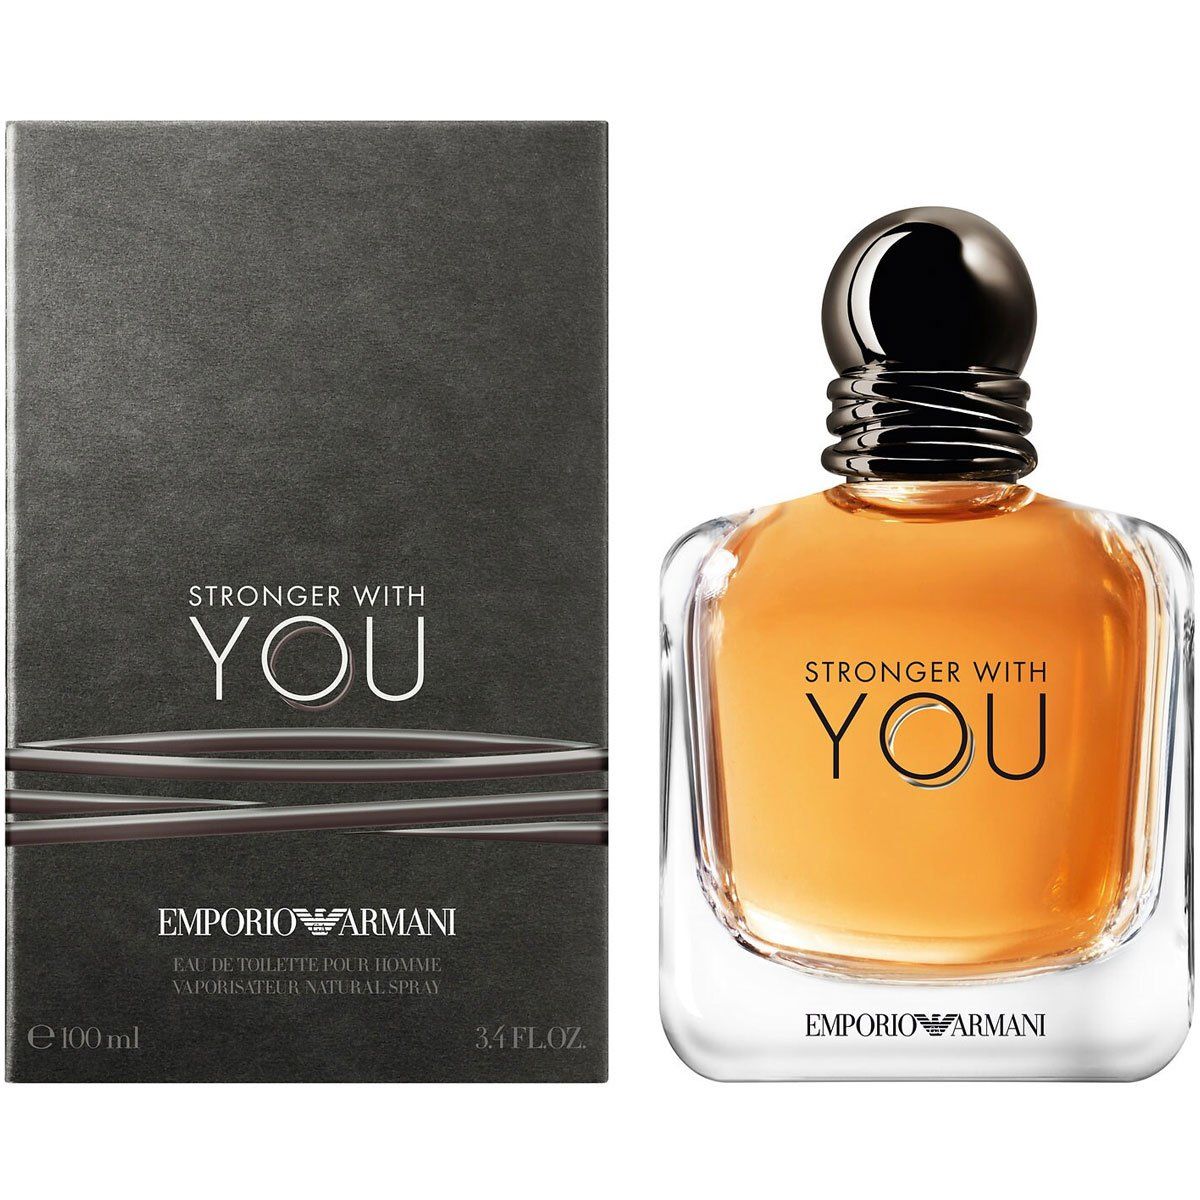 Arriba 62+ imagen armani stronger with you near me